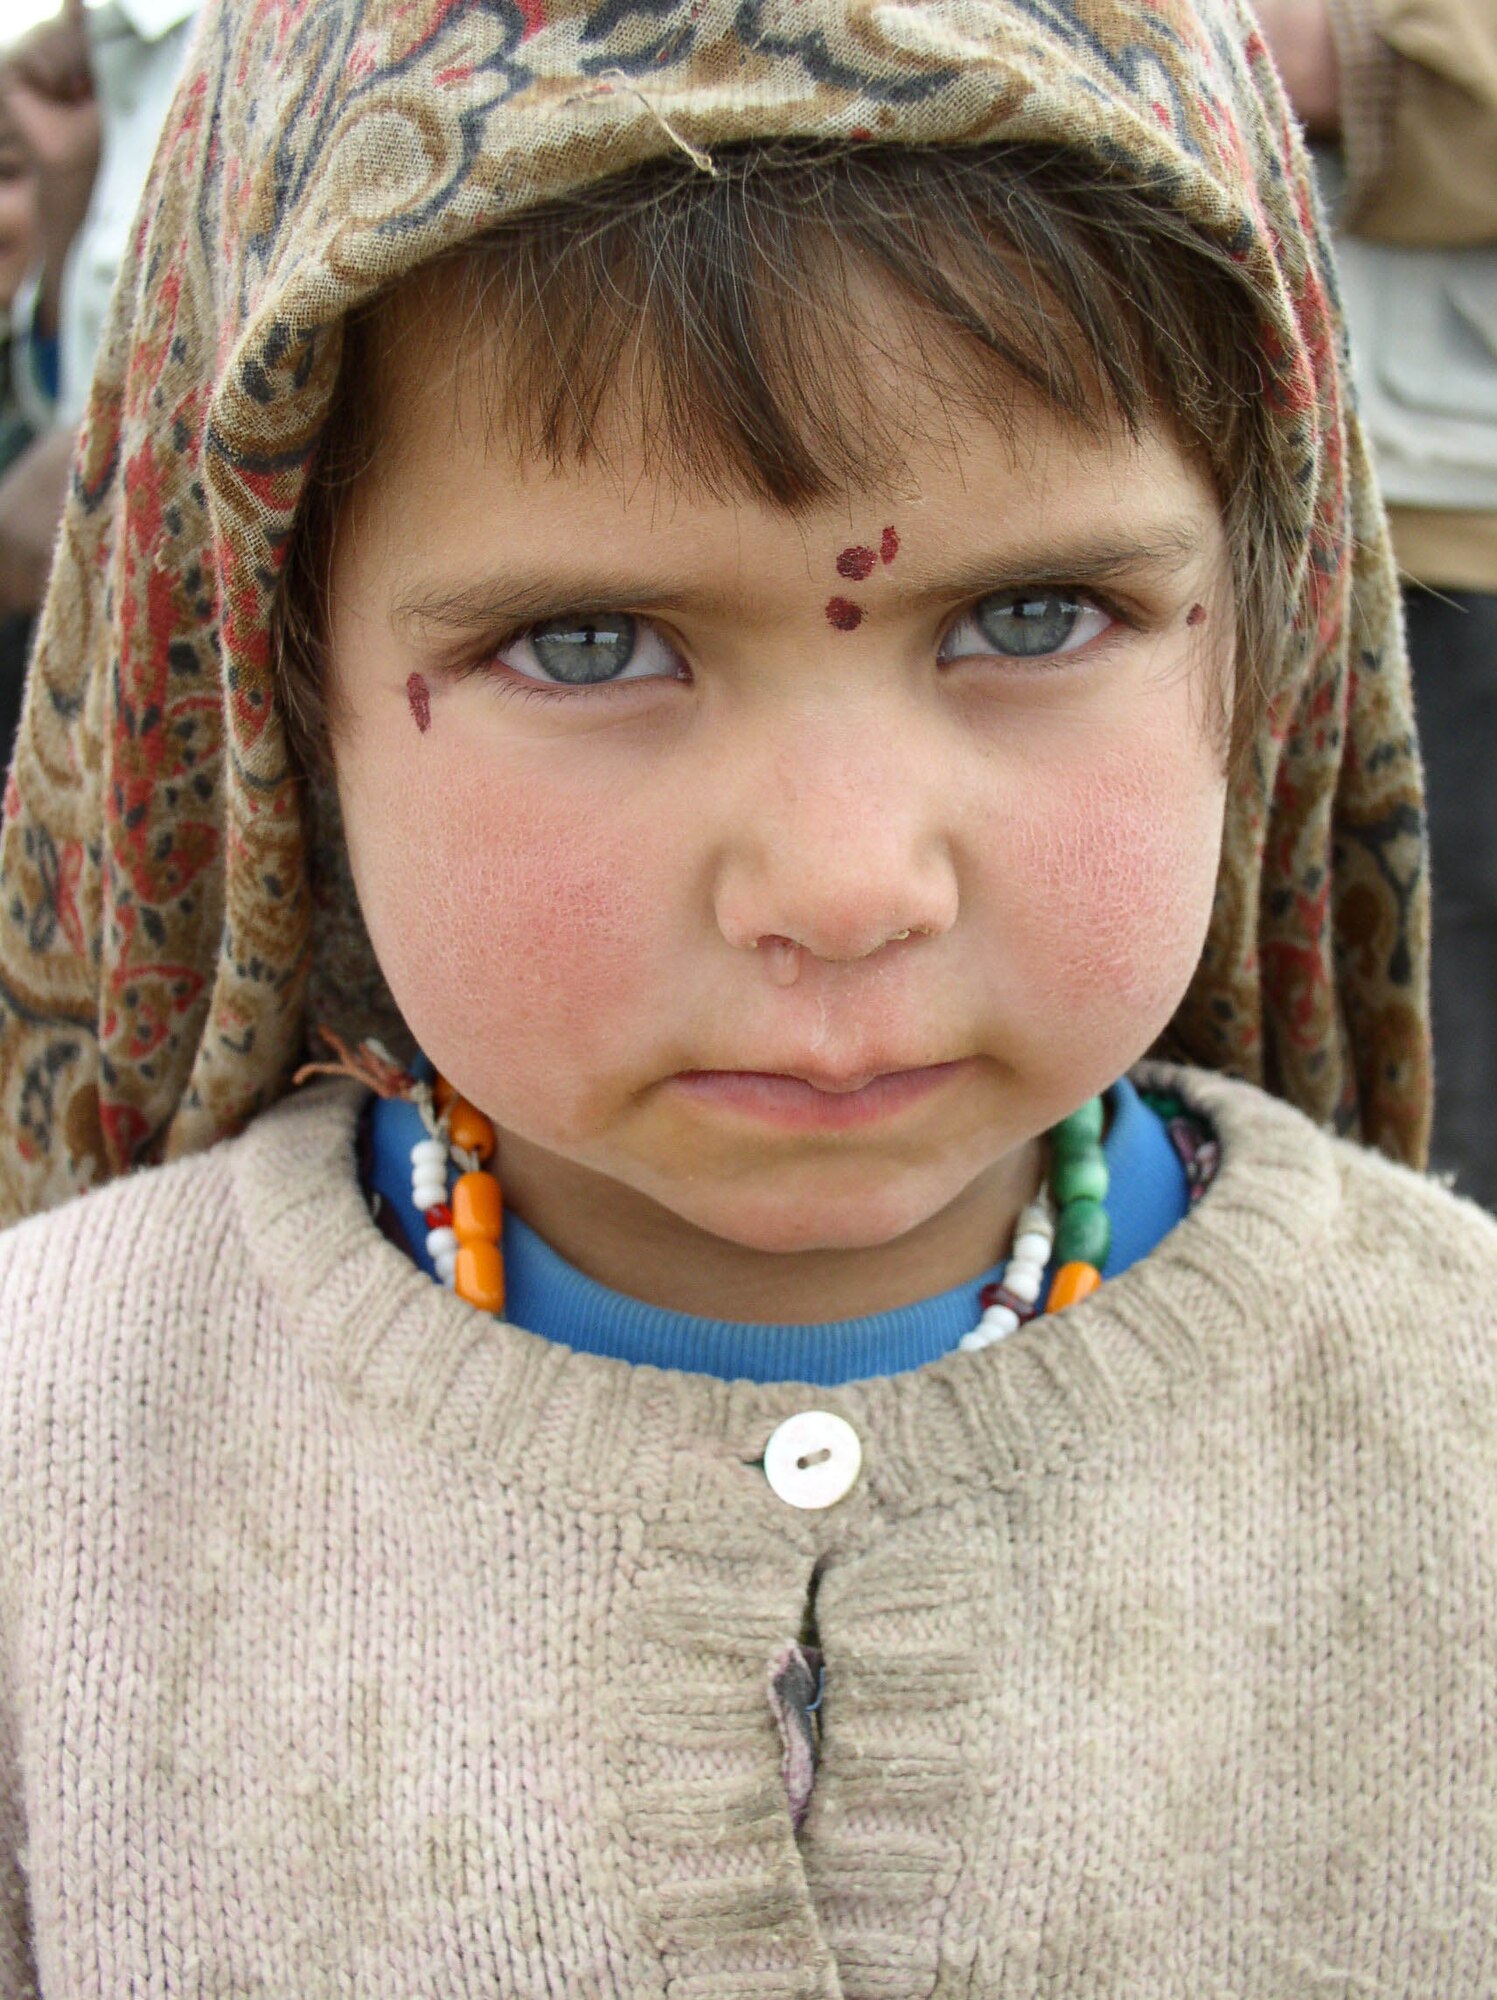 This young girl pictured in Zangalan was described by Sergeant Nale as a beautiful young girl he just had to take a picture of. He said it was sad as you go closer to her face you could see how harsh the elements had been to her because her checks seemed burned by the wind. “In her face you could just see the hard life she had a head of her,” Sergeant Nale said.